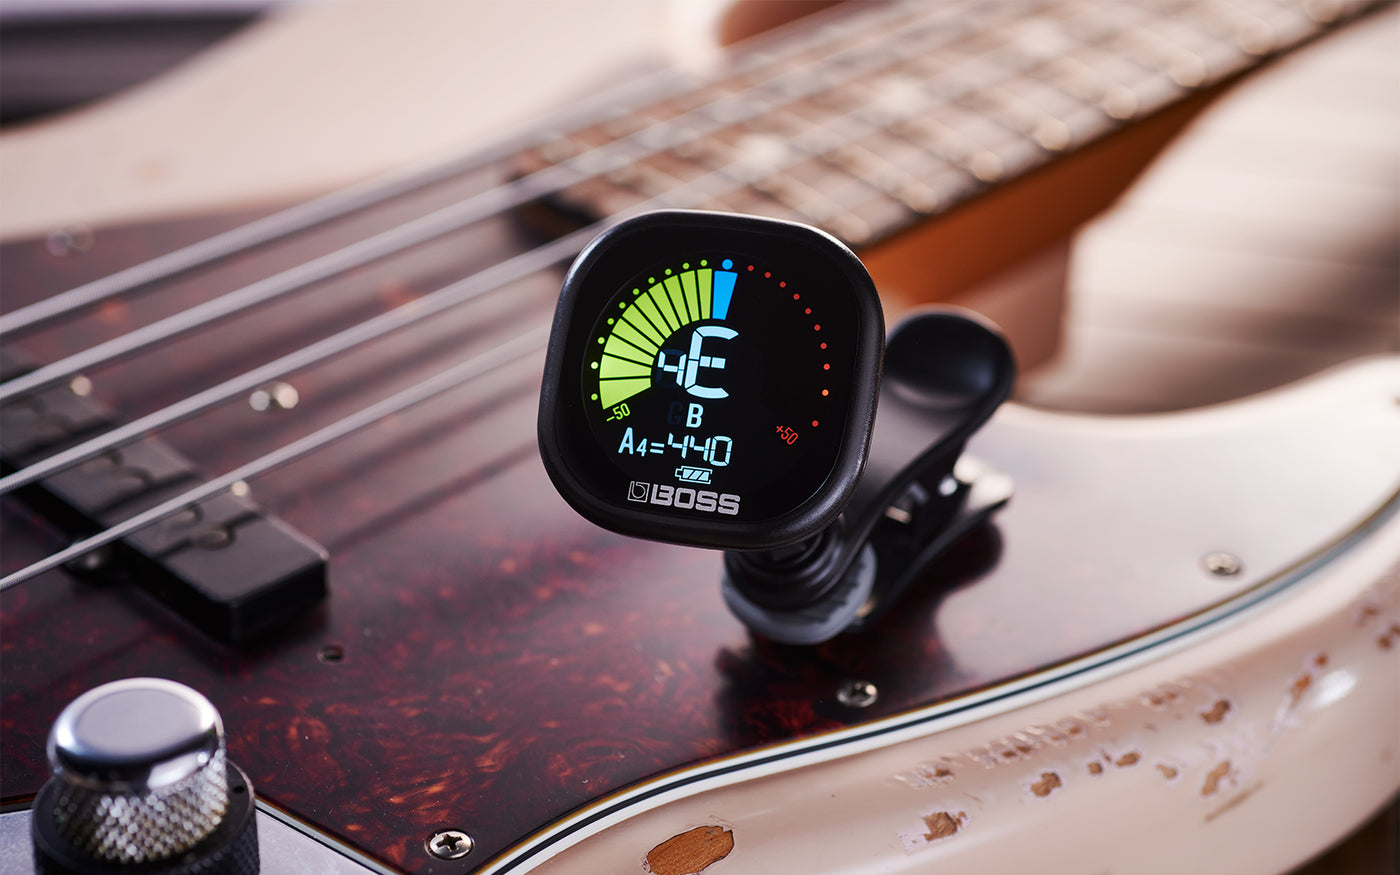 BOSS TU-05 Clip On Tuner with Rechargeable Battery